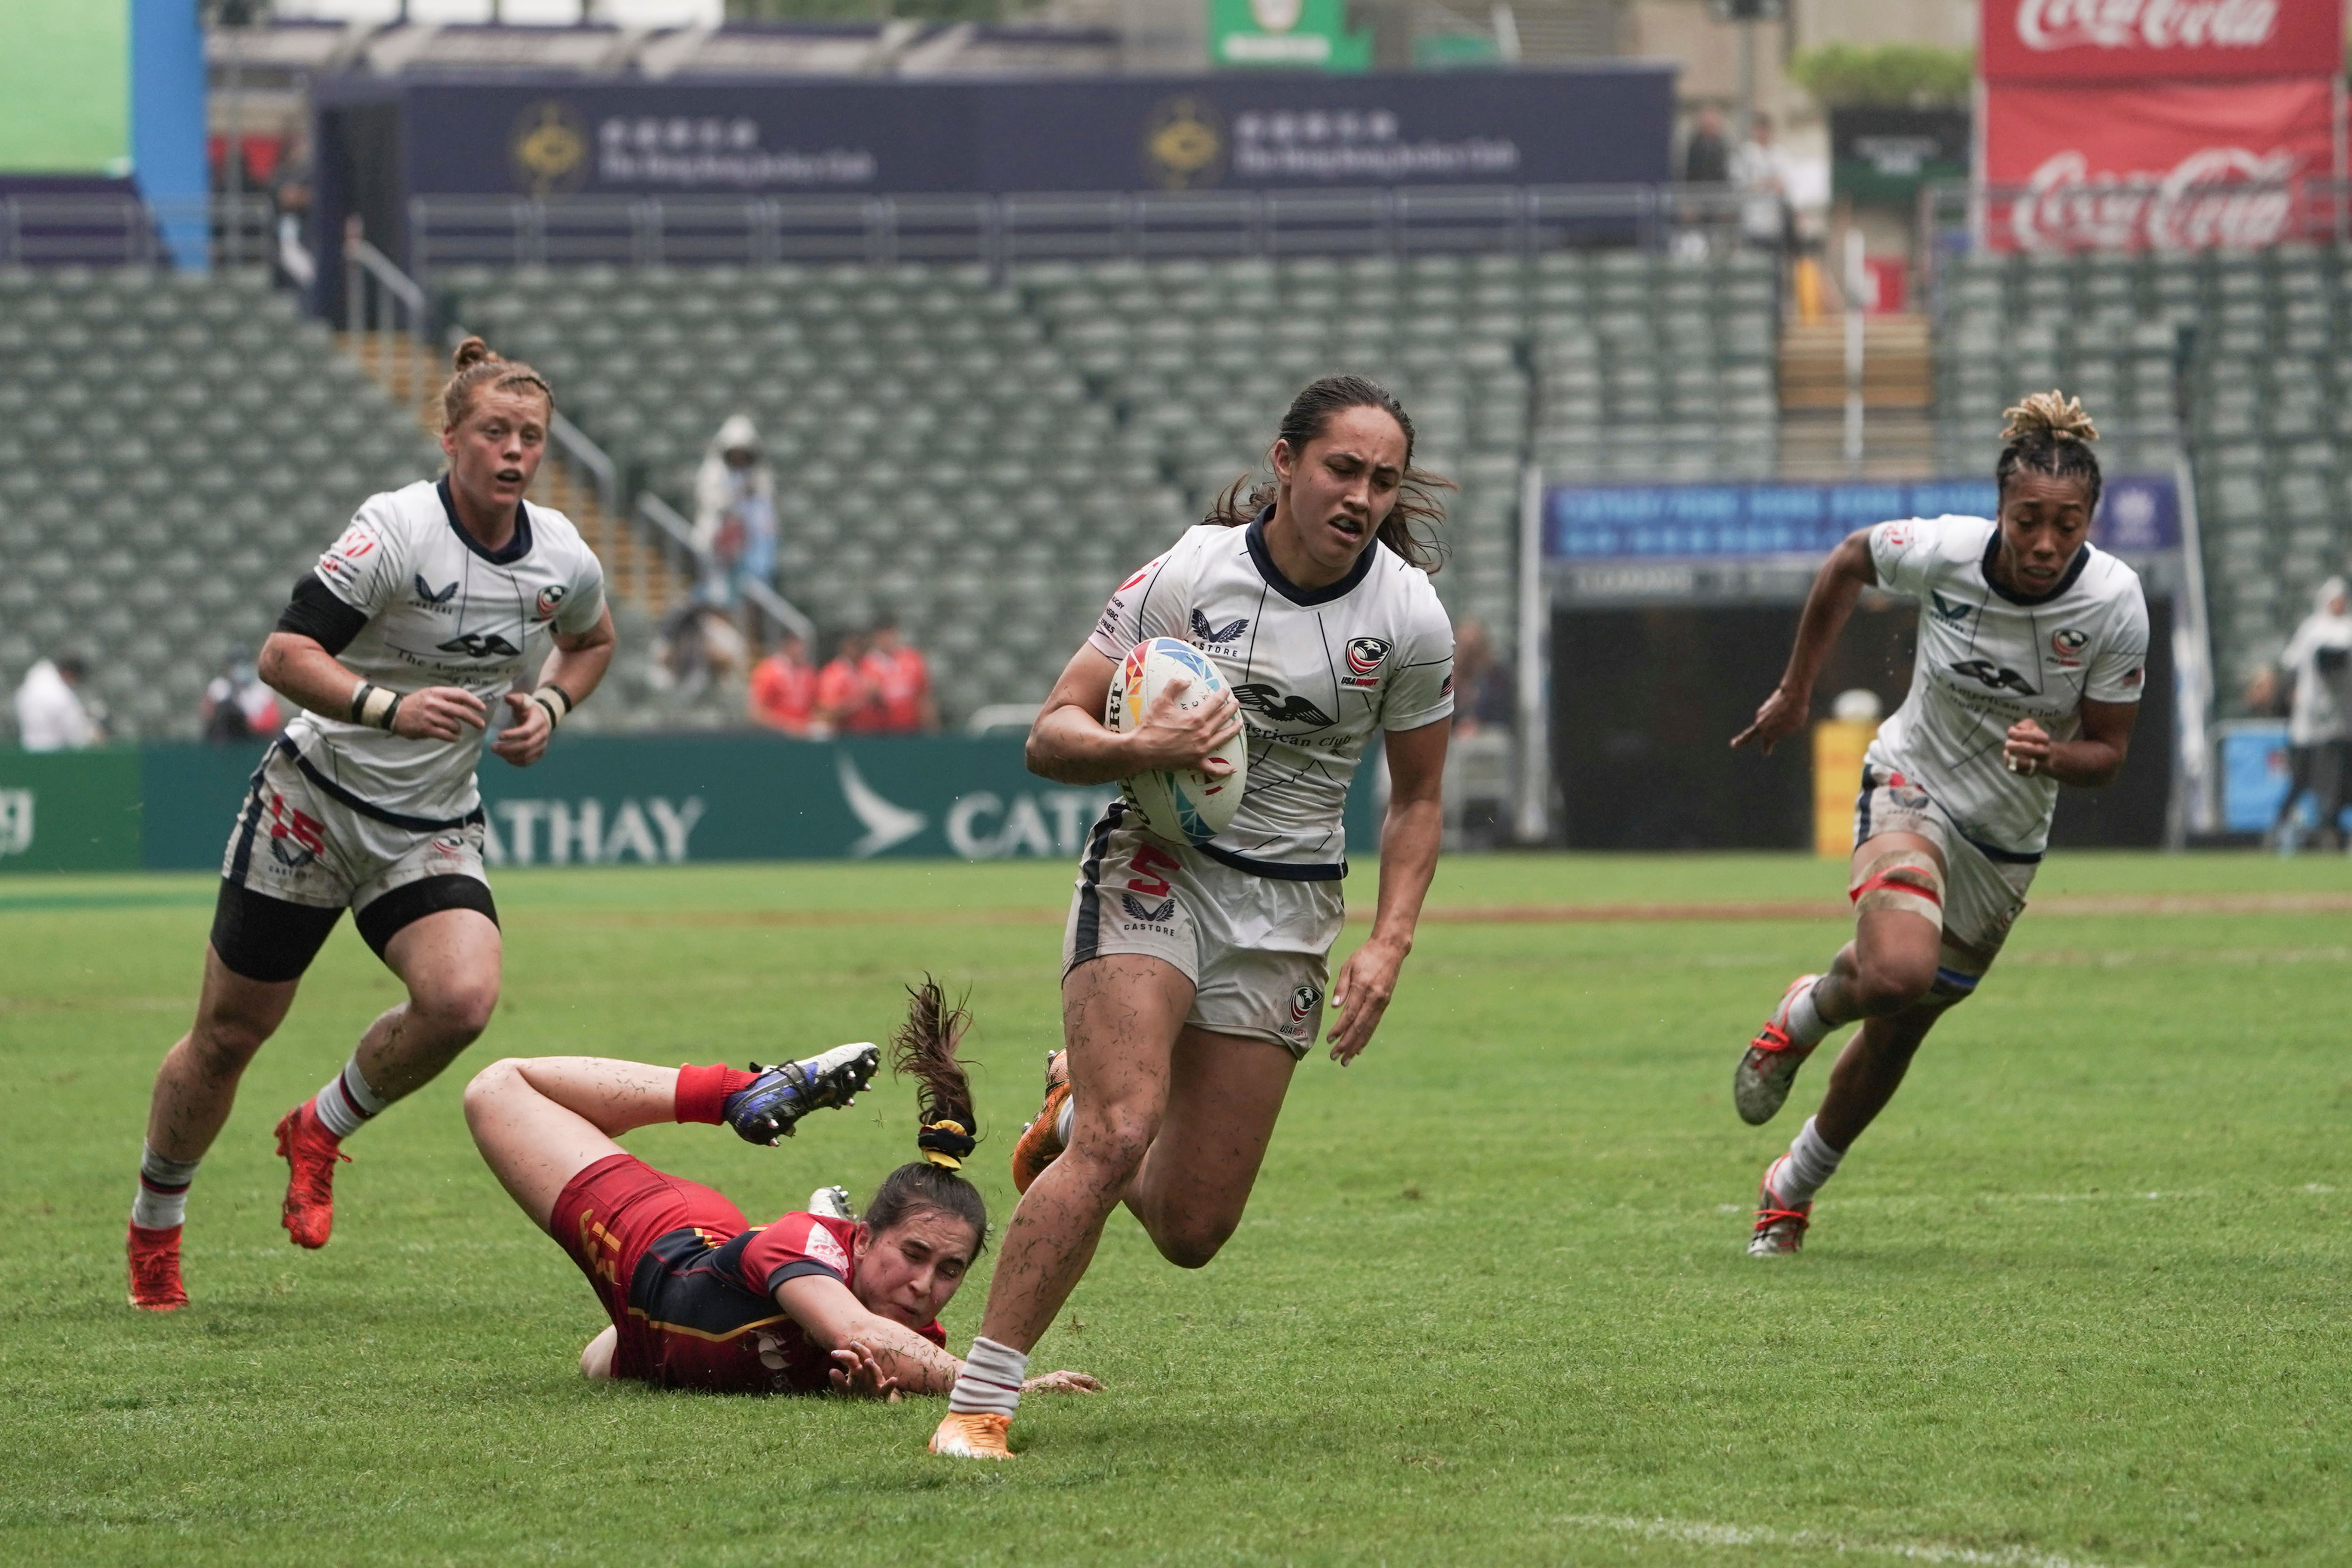 (Anthony Kwan | AP) USA's Alex Sedrick scores a try as she breaks away from Spain's Bruna Elias's tackle during the first day of the Hong Kong Sevens rugby tournament in Hong Kong, Friday, March 31, 2023.